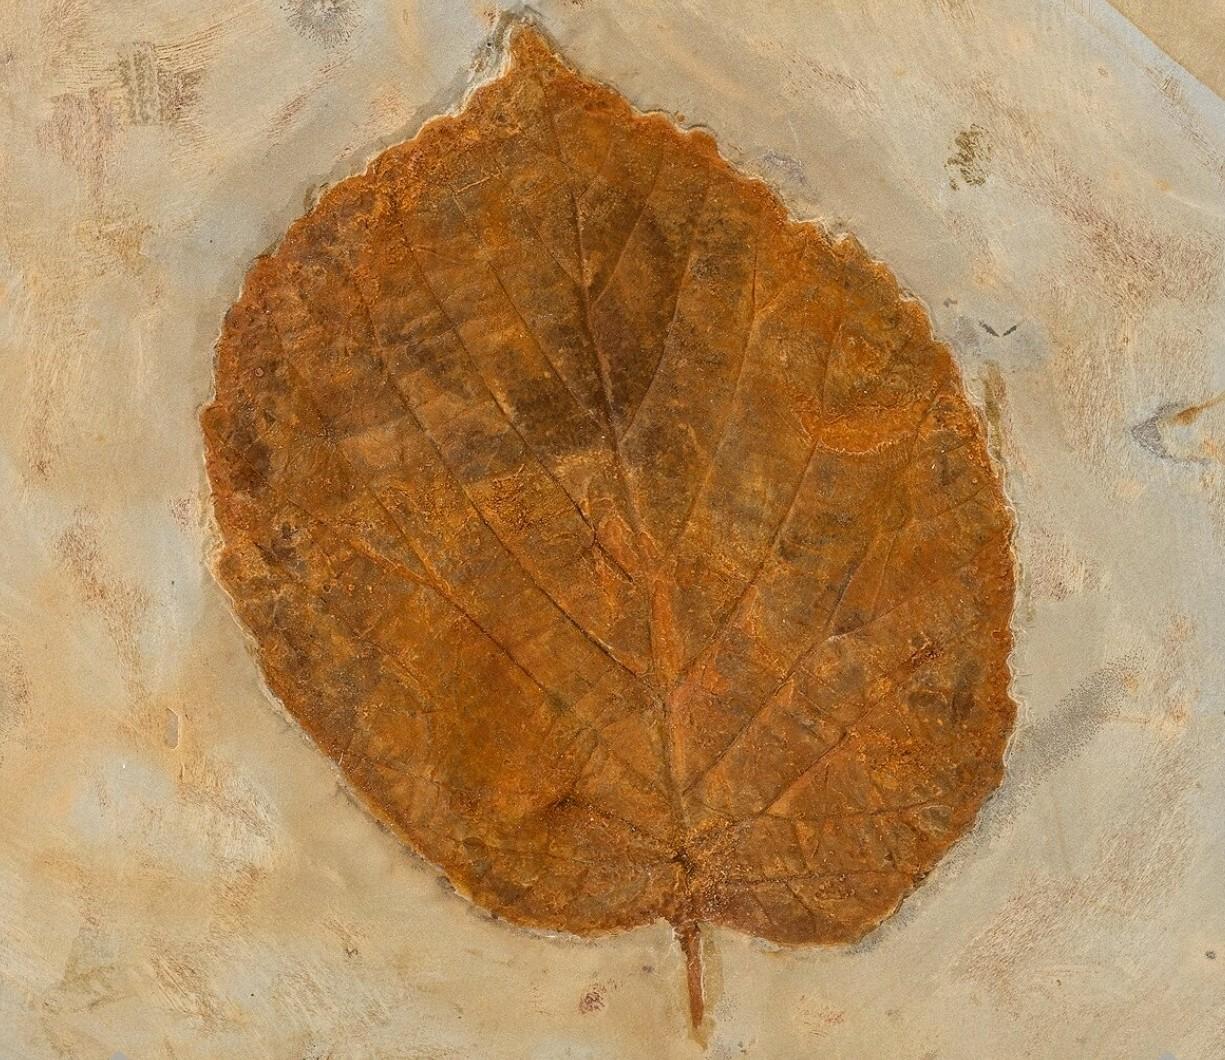 Fossil Leaf
Davidia antiqua
Paleocene epoch
Fort Union Formation
Glendive, Montana, USA
5.47 x 5.55 x 0.97 inches 
(13.90 x 14.10 x 2.46 cm)

Beautifully presented and carefully preserved, this 60 million year old fossilized prehistoric leaf is a